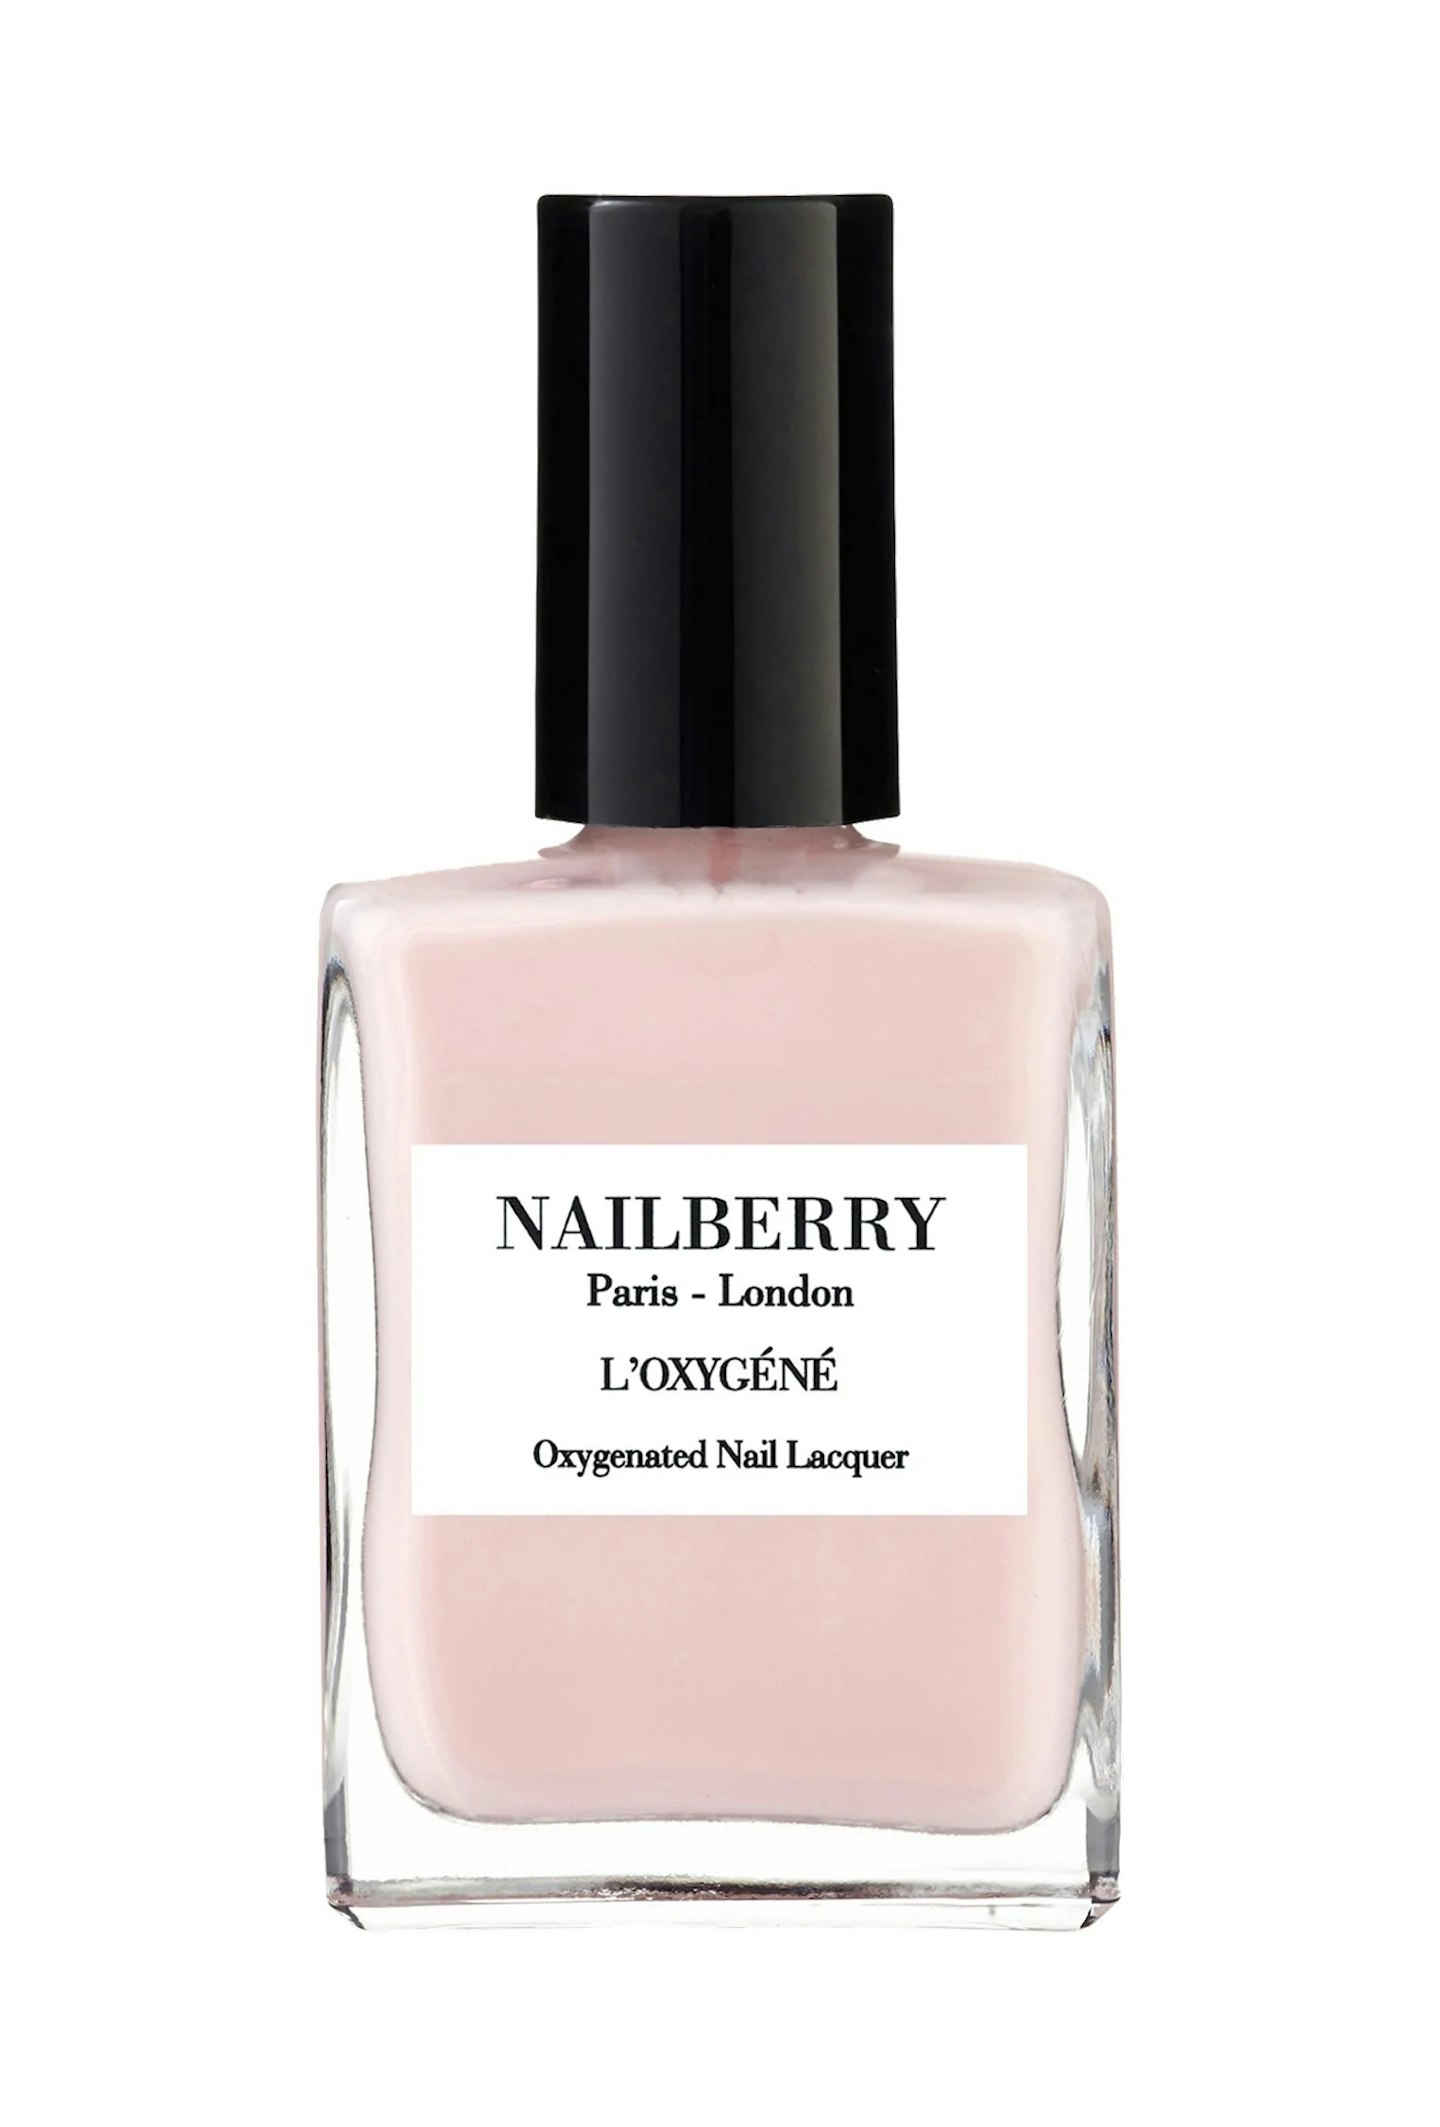 Nailberry L'Oxygene Oxygenated Nail Polish in Candy Floss